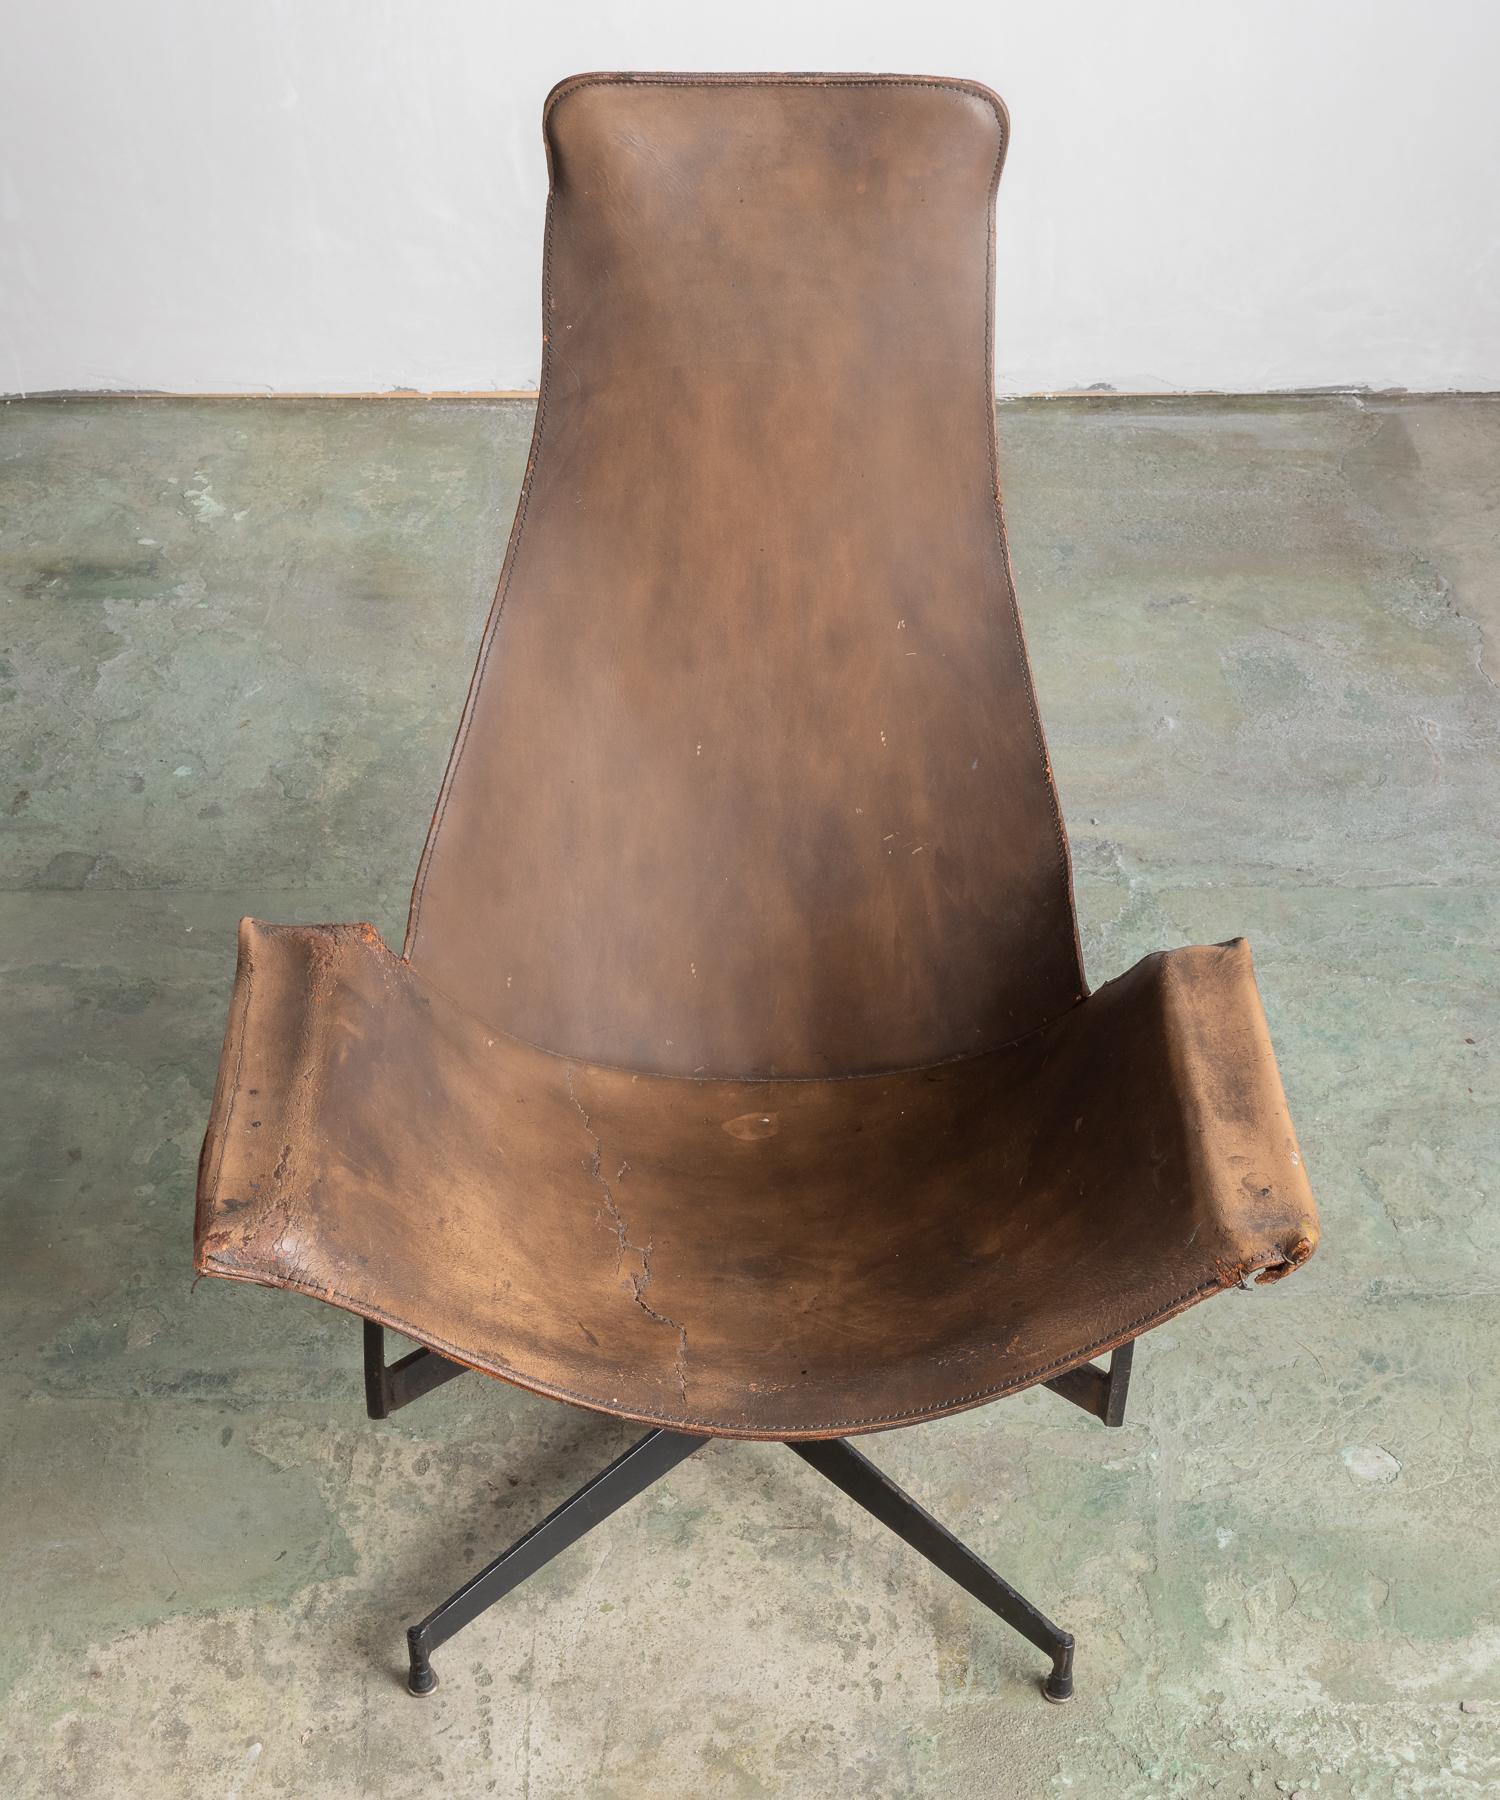 American Leather Sling Chair by William Katavolos, Germany, circa 1950